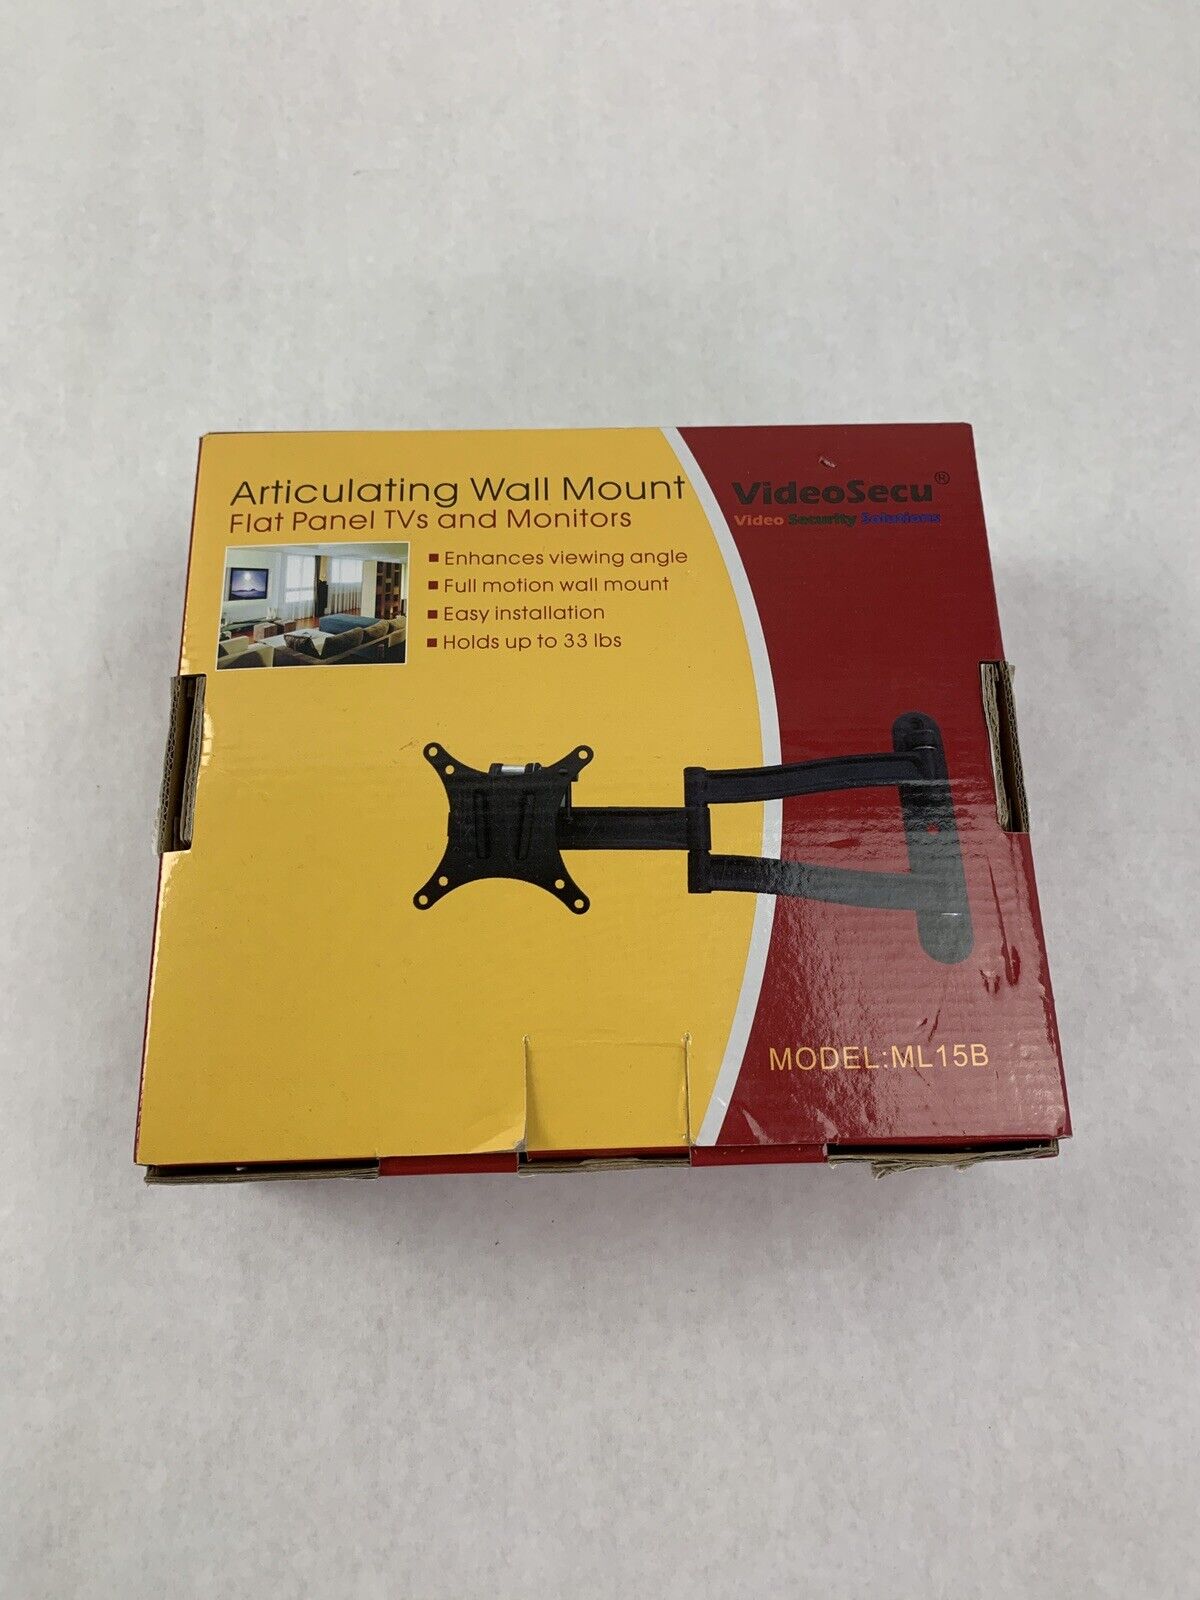 VideoSecu Articulating Wall Mount ML15B For Flat Panel TVs and Monitors